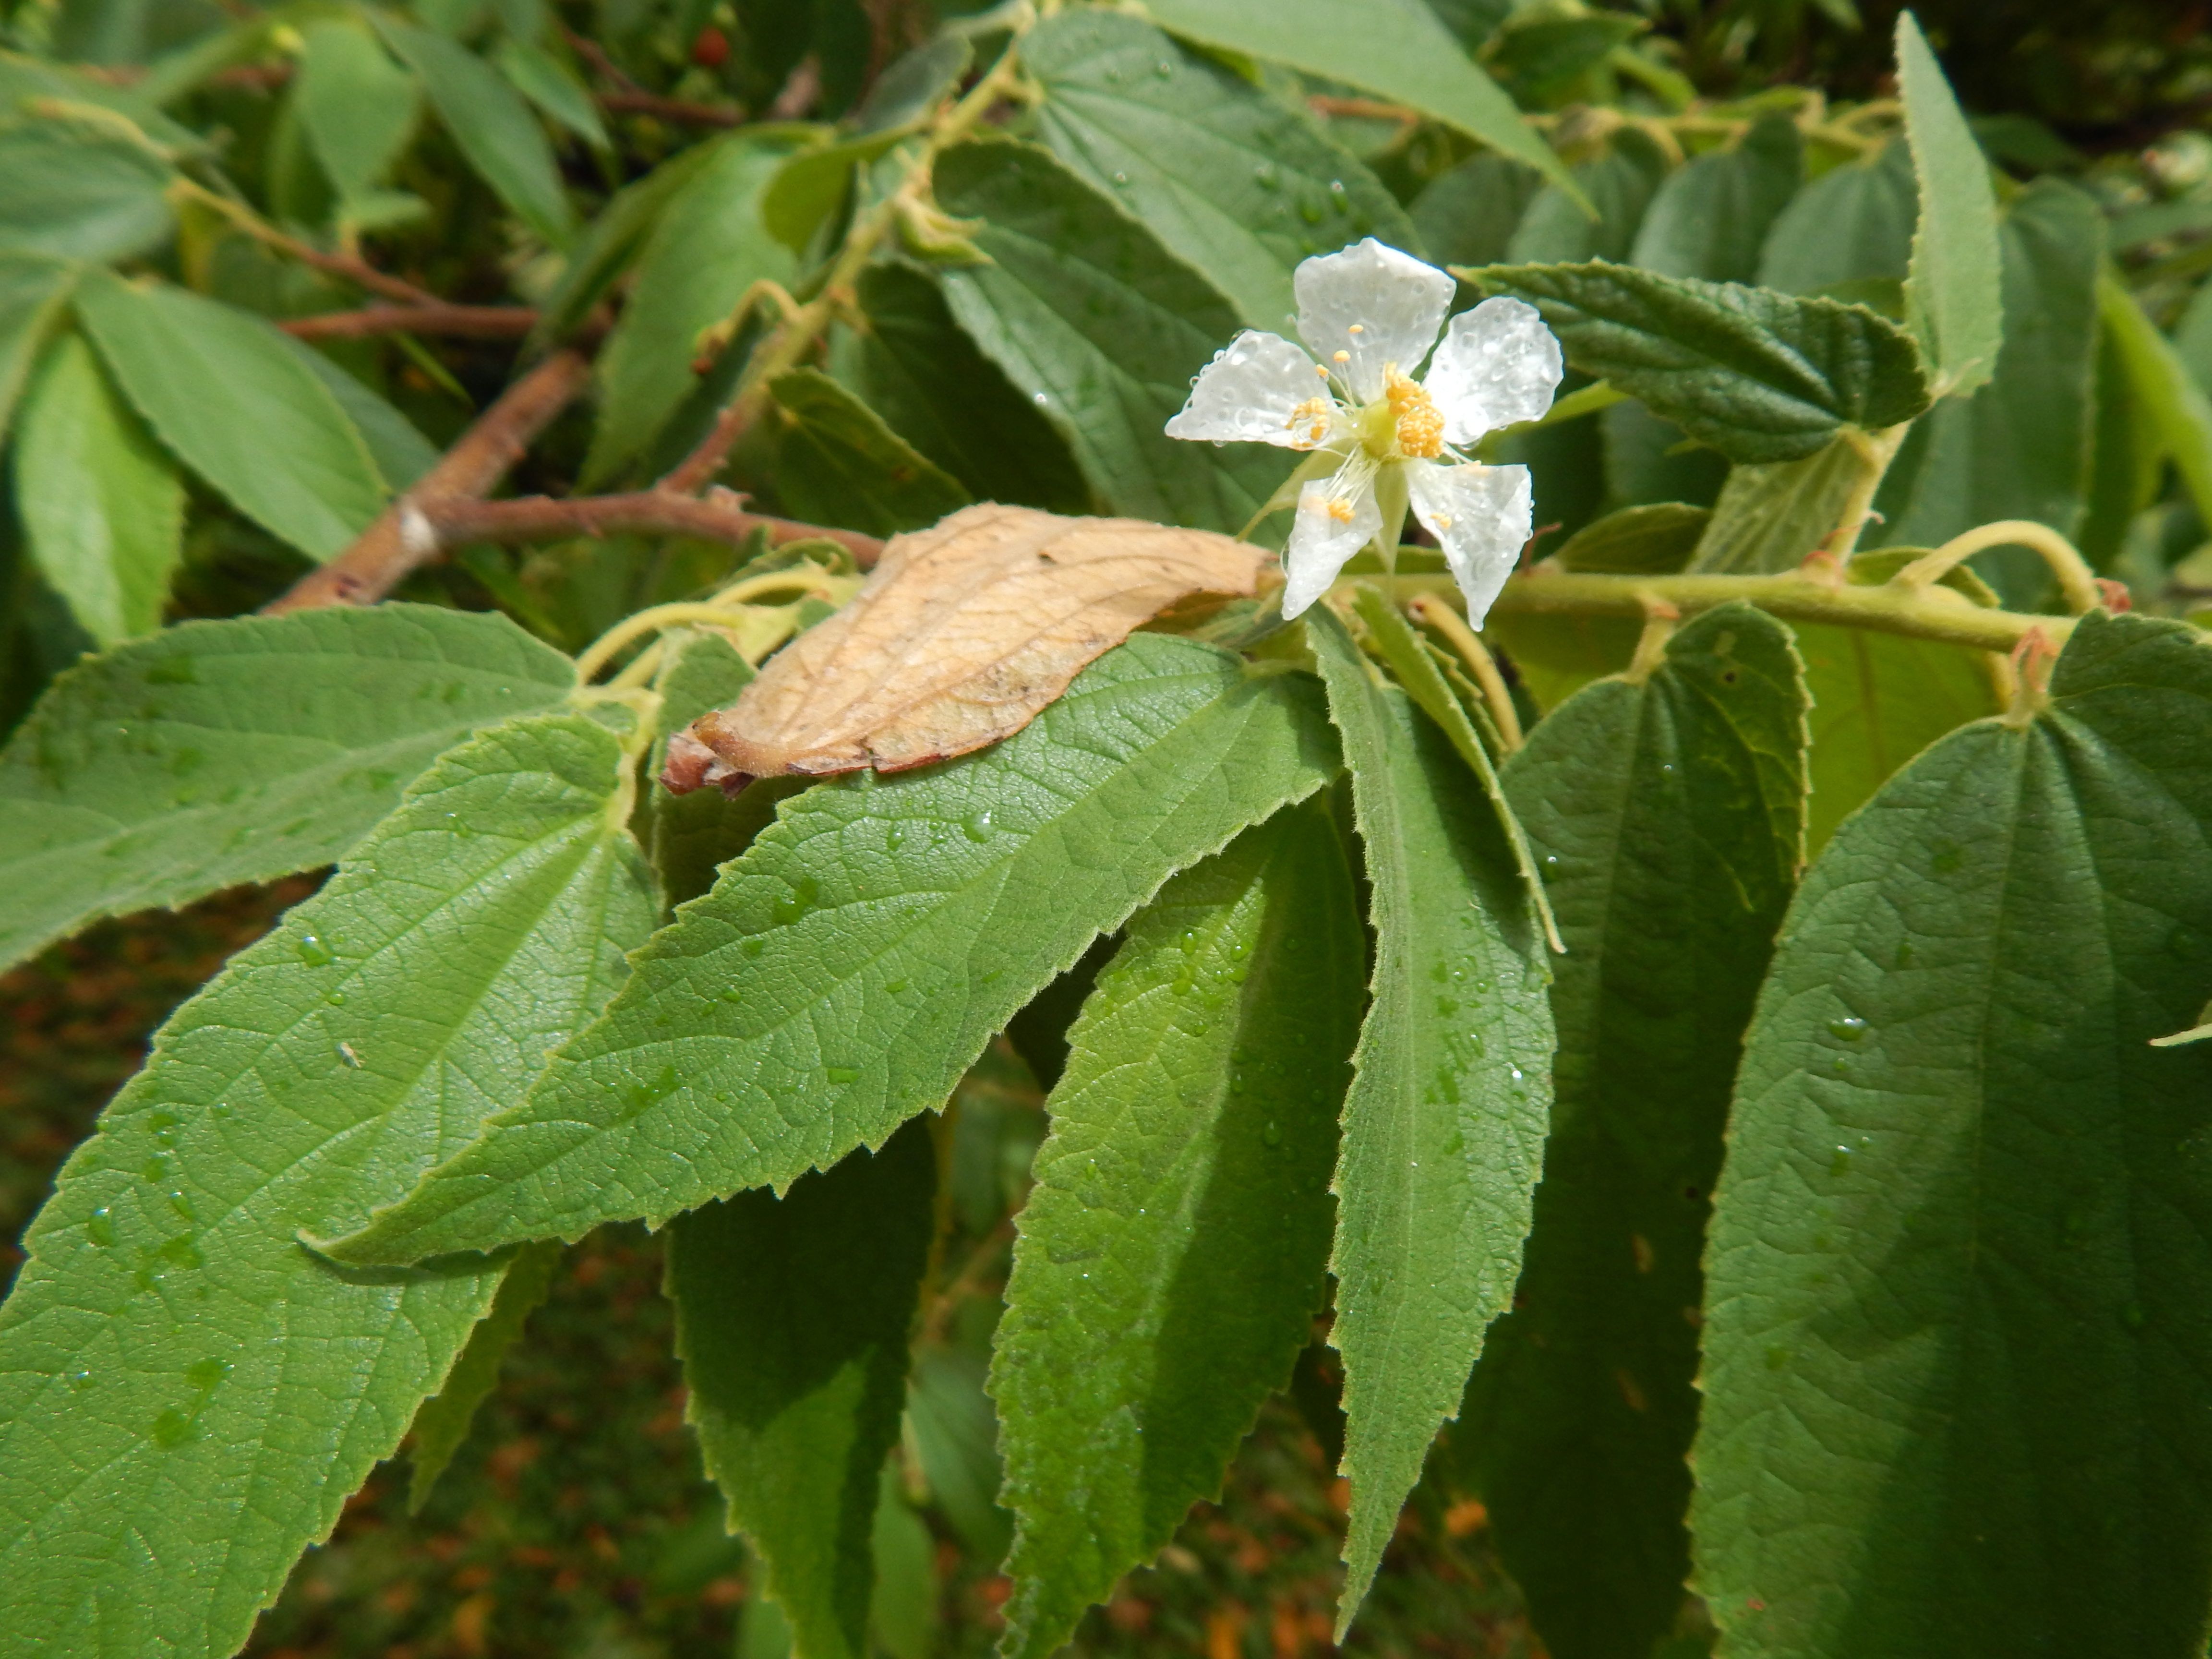 Recently rained on white flower with five petals above a leaved branch